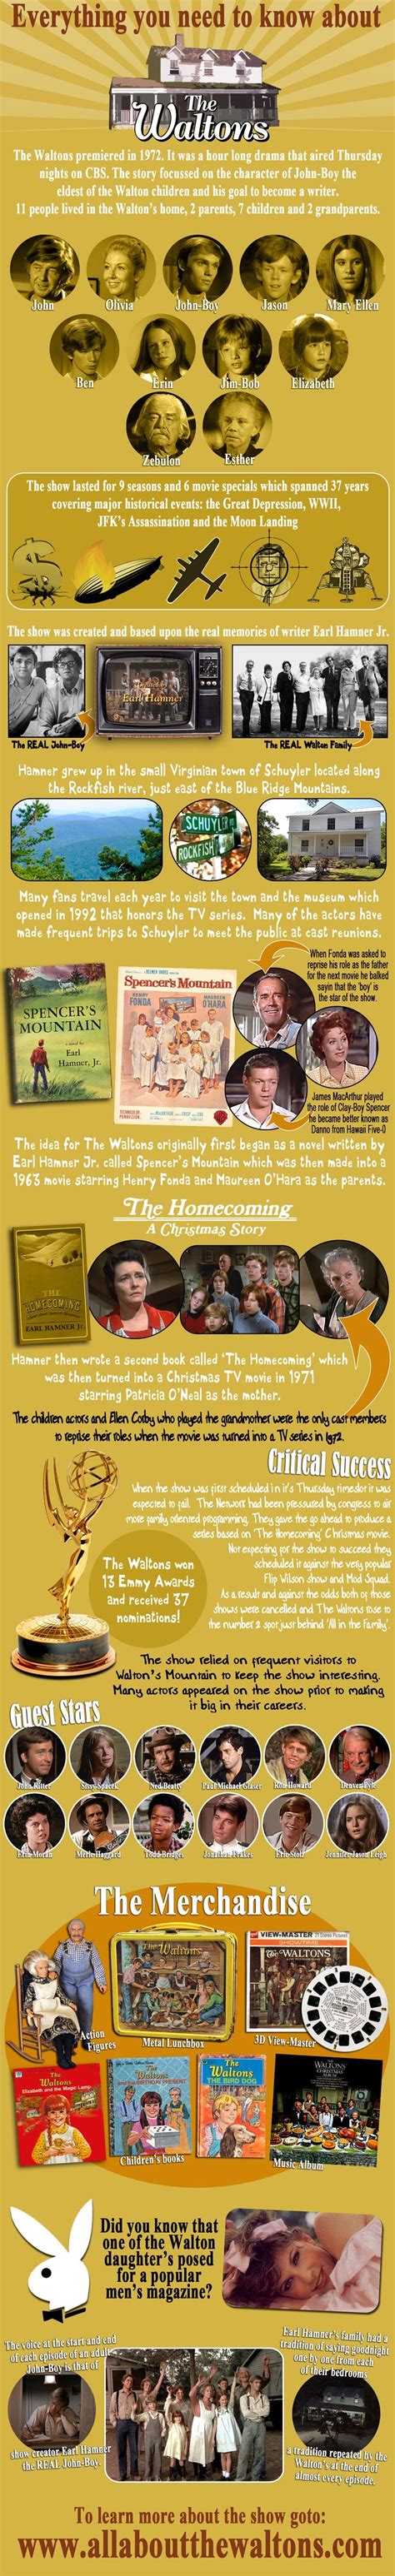 The Waltons The Last Two Facts Are The Best The Waltons Tv Show